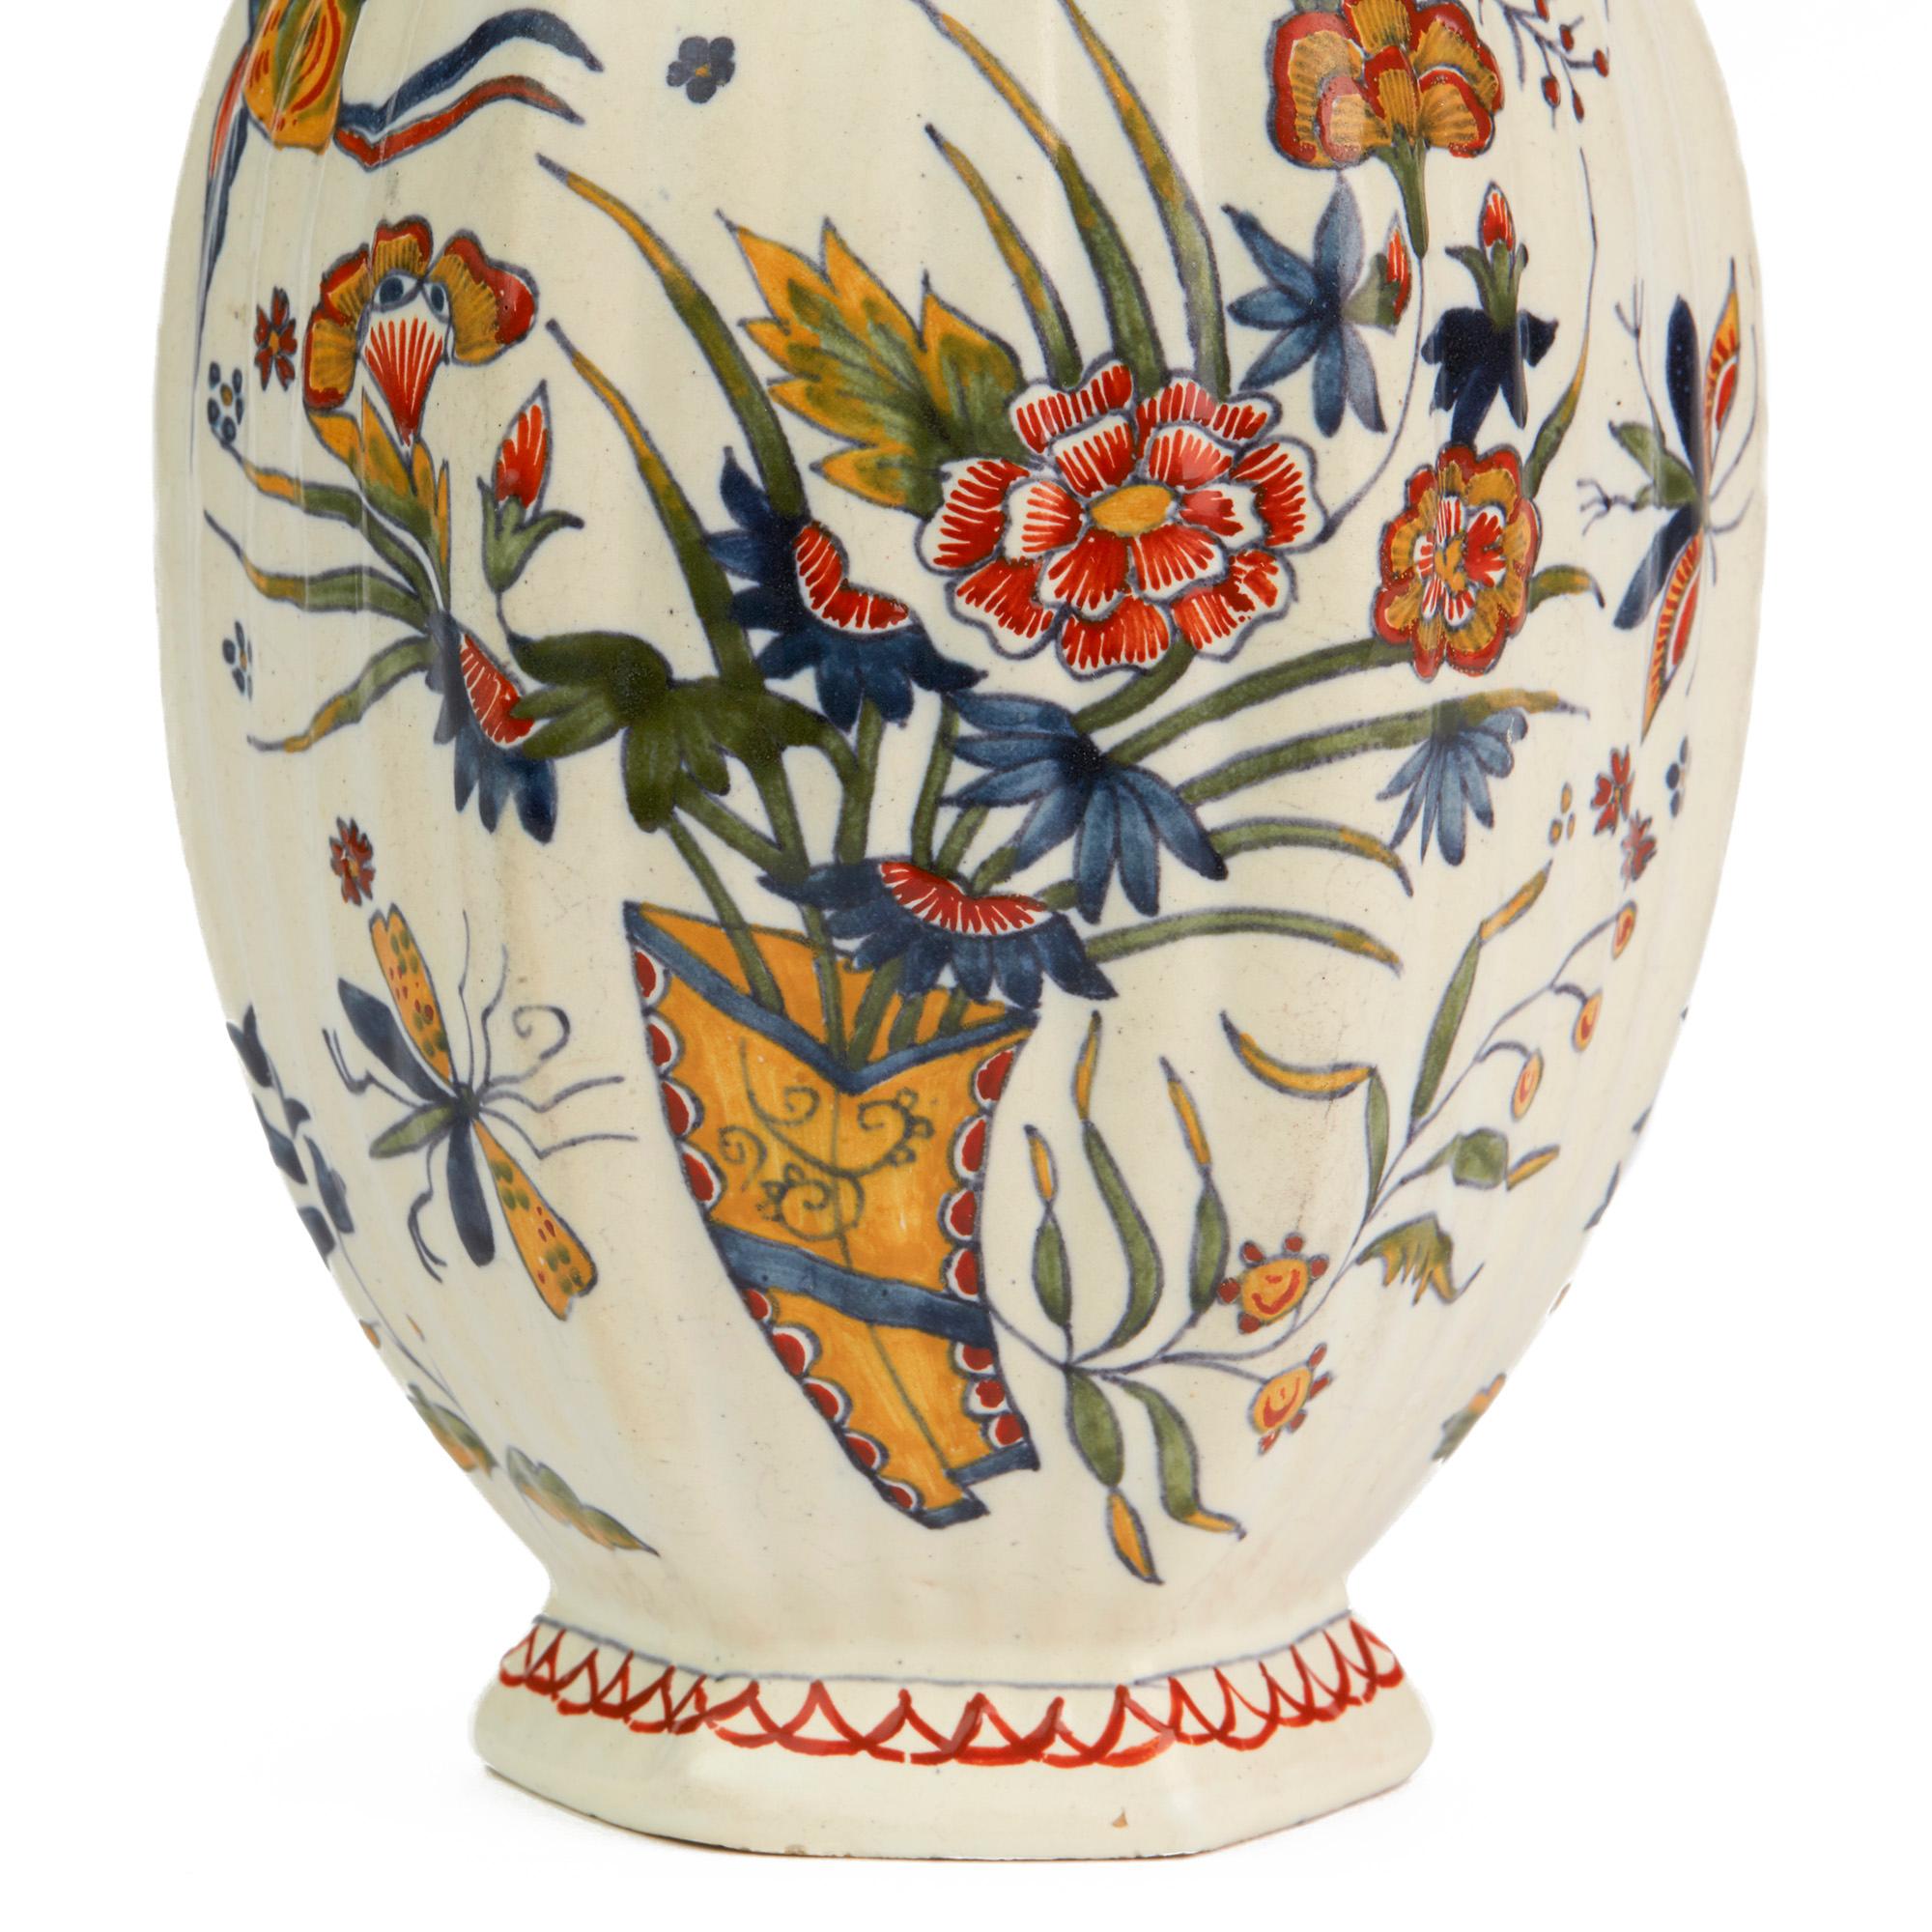 Dutch Delft Faience Polychrome Painted Pottery Vase, 18th-19th Century